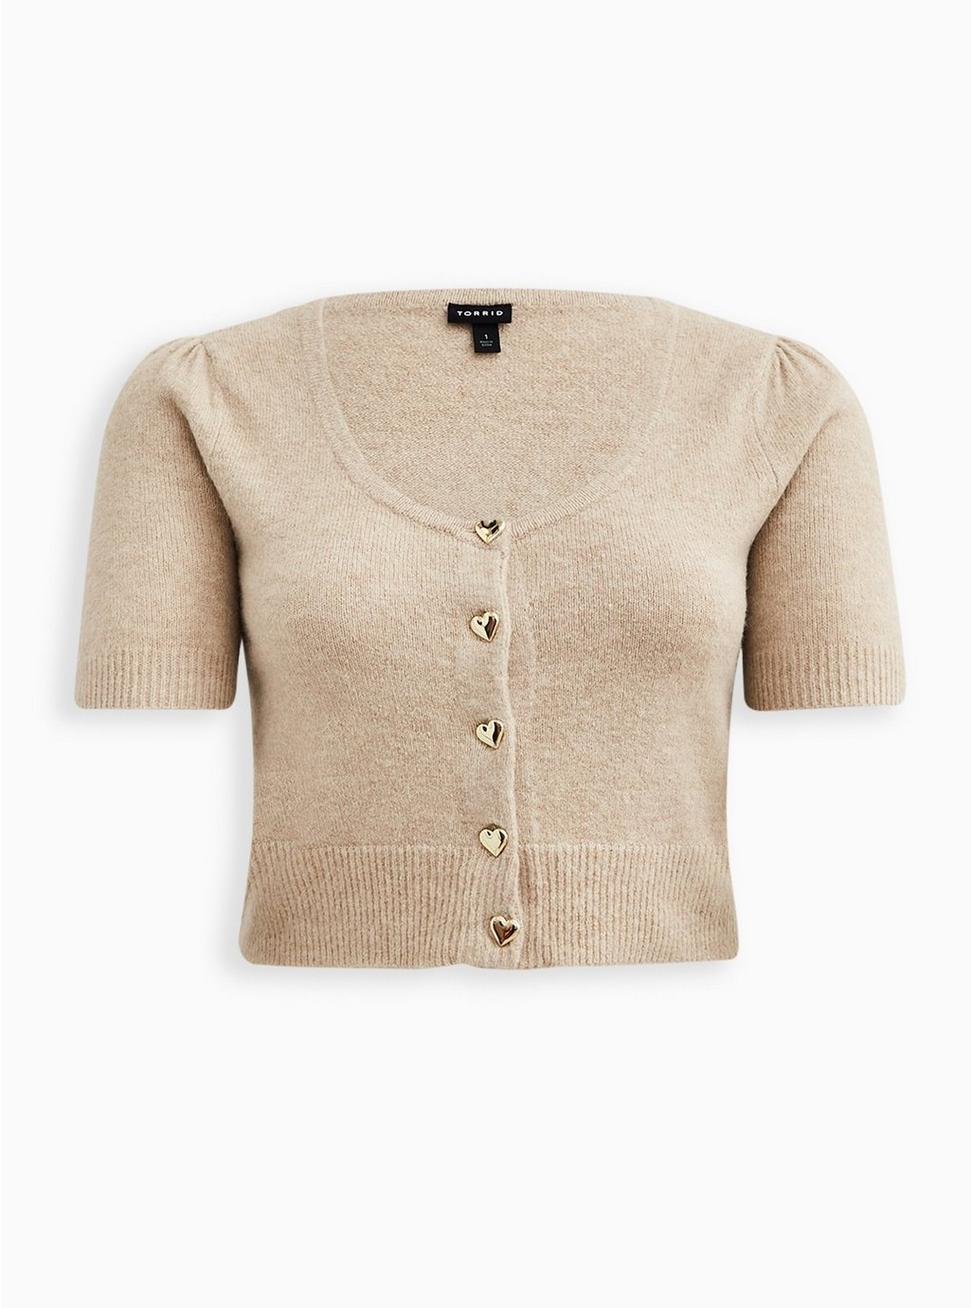 Vegan Cashmere Cardigan Button-Front Cropped Sweater, TAUPE, hi-res